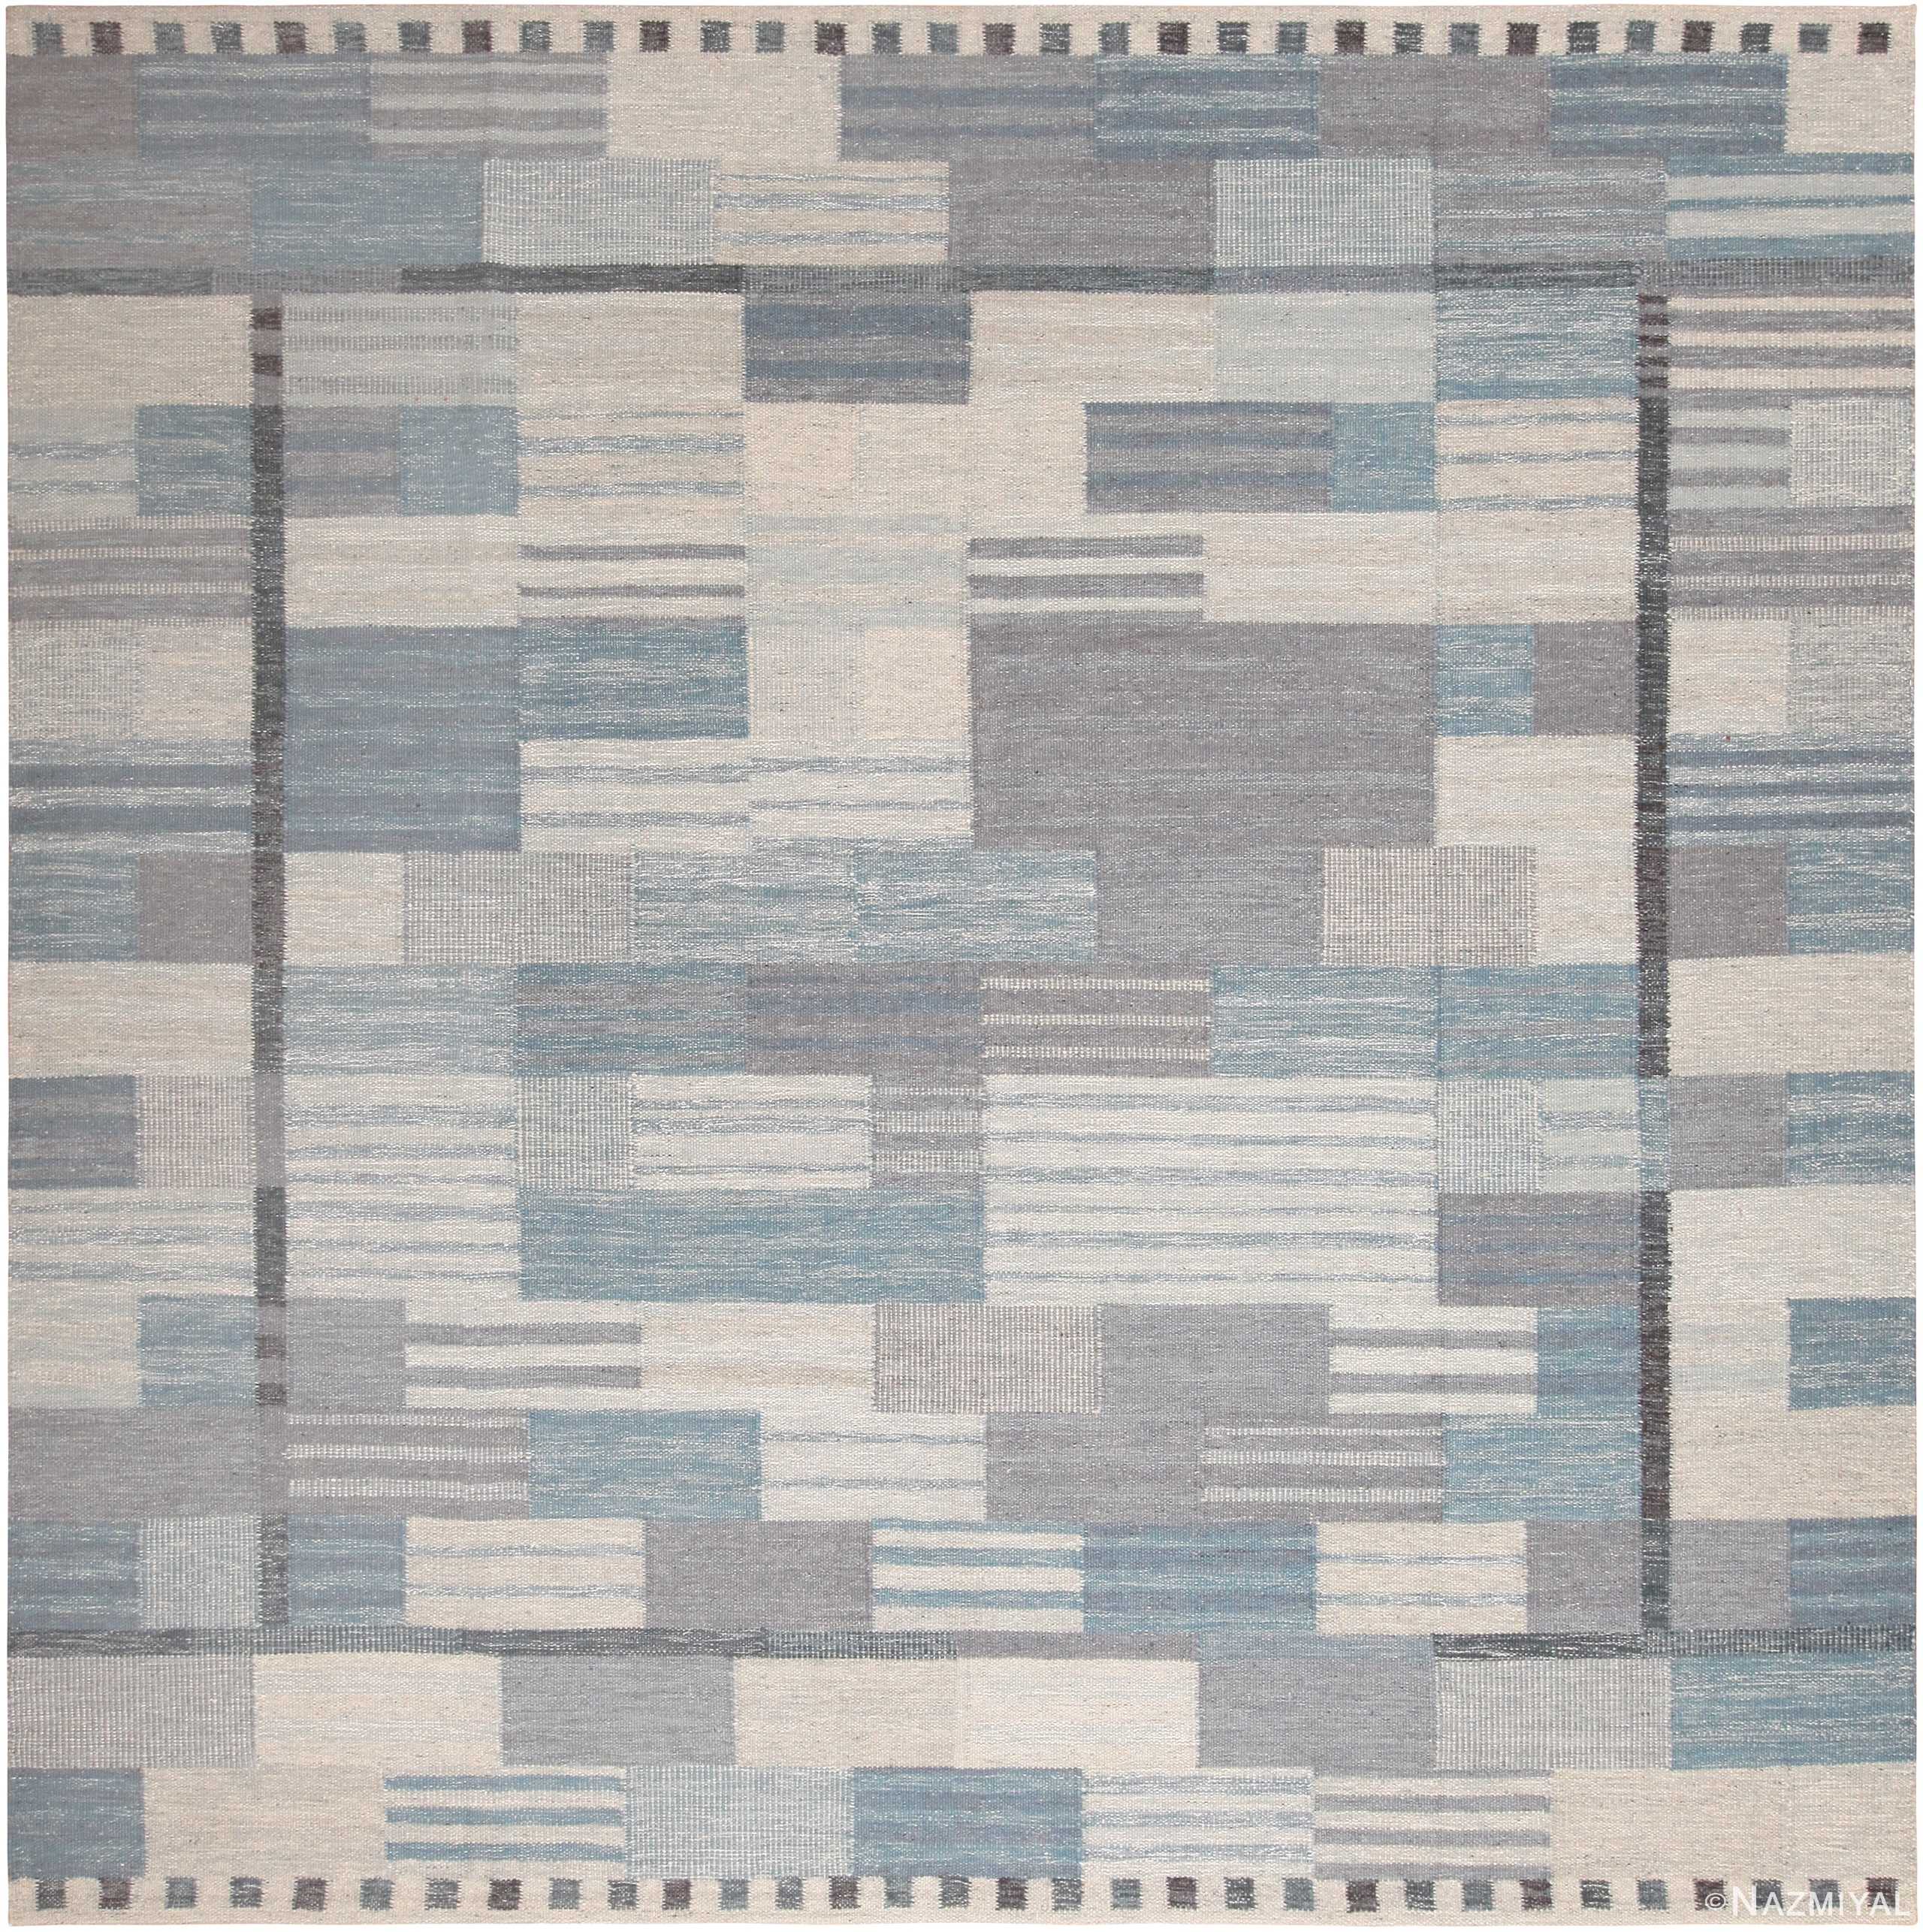 Square Modern Geometric Swedish Inspired Flat Woven Area Rug 60898 by Nazmiyal Antique Rugs